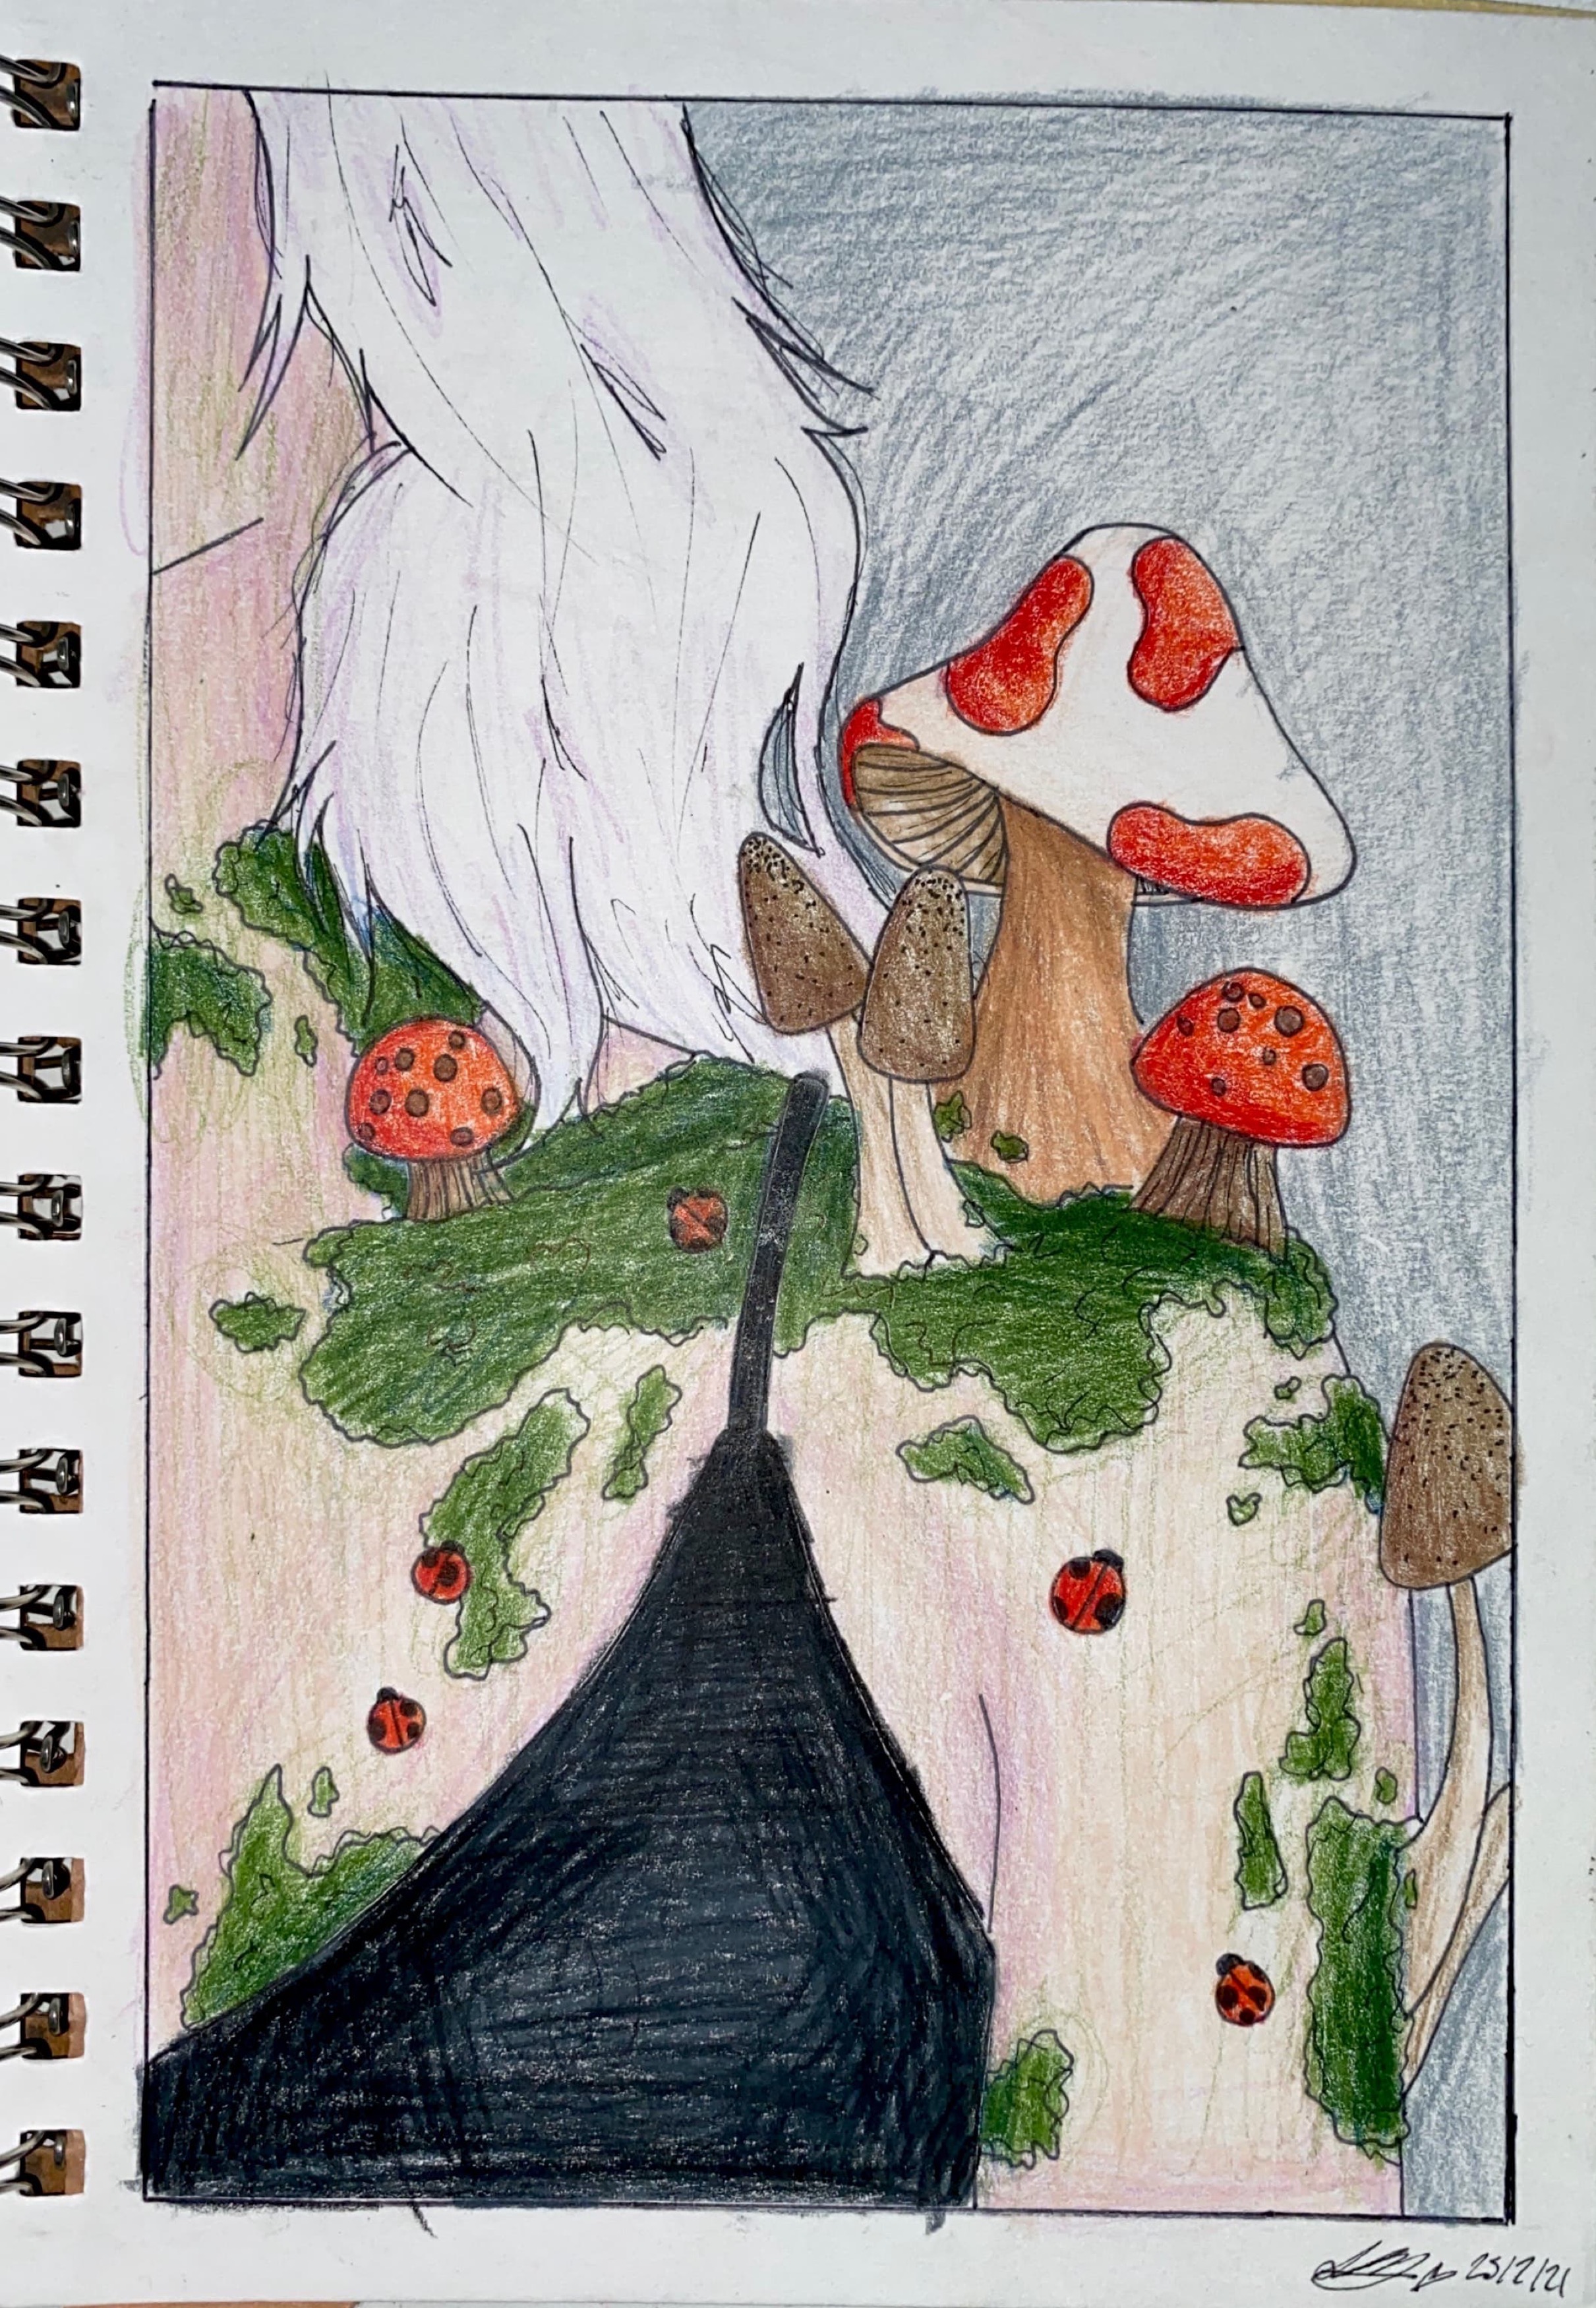 a woman's shoulder. she is pale, has white hair and moss and mushrooms are growing on her